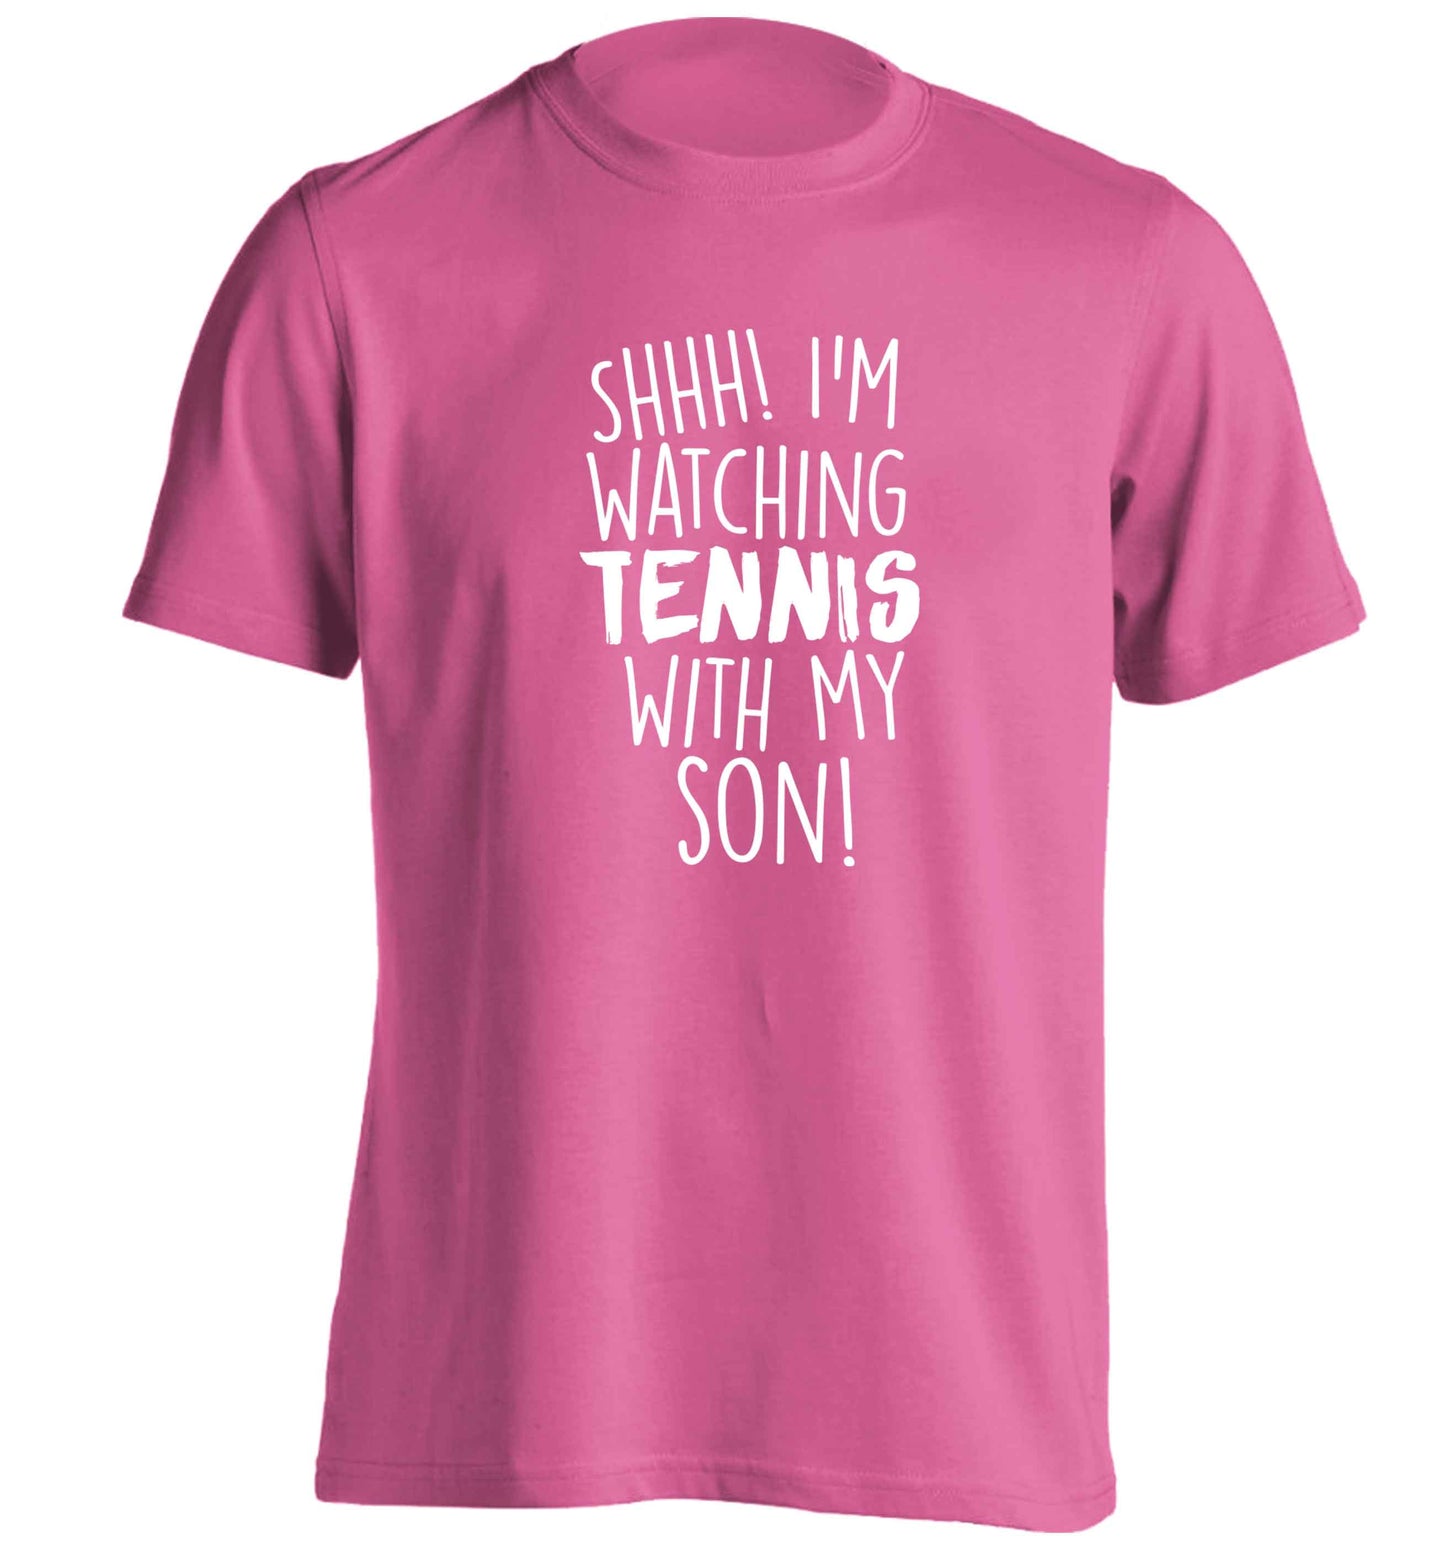 Shh! I'm watching tennis with my son! adults unisex pink Tshirt 2XL